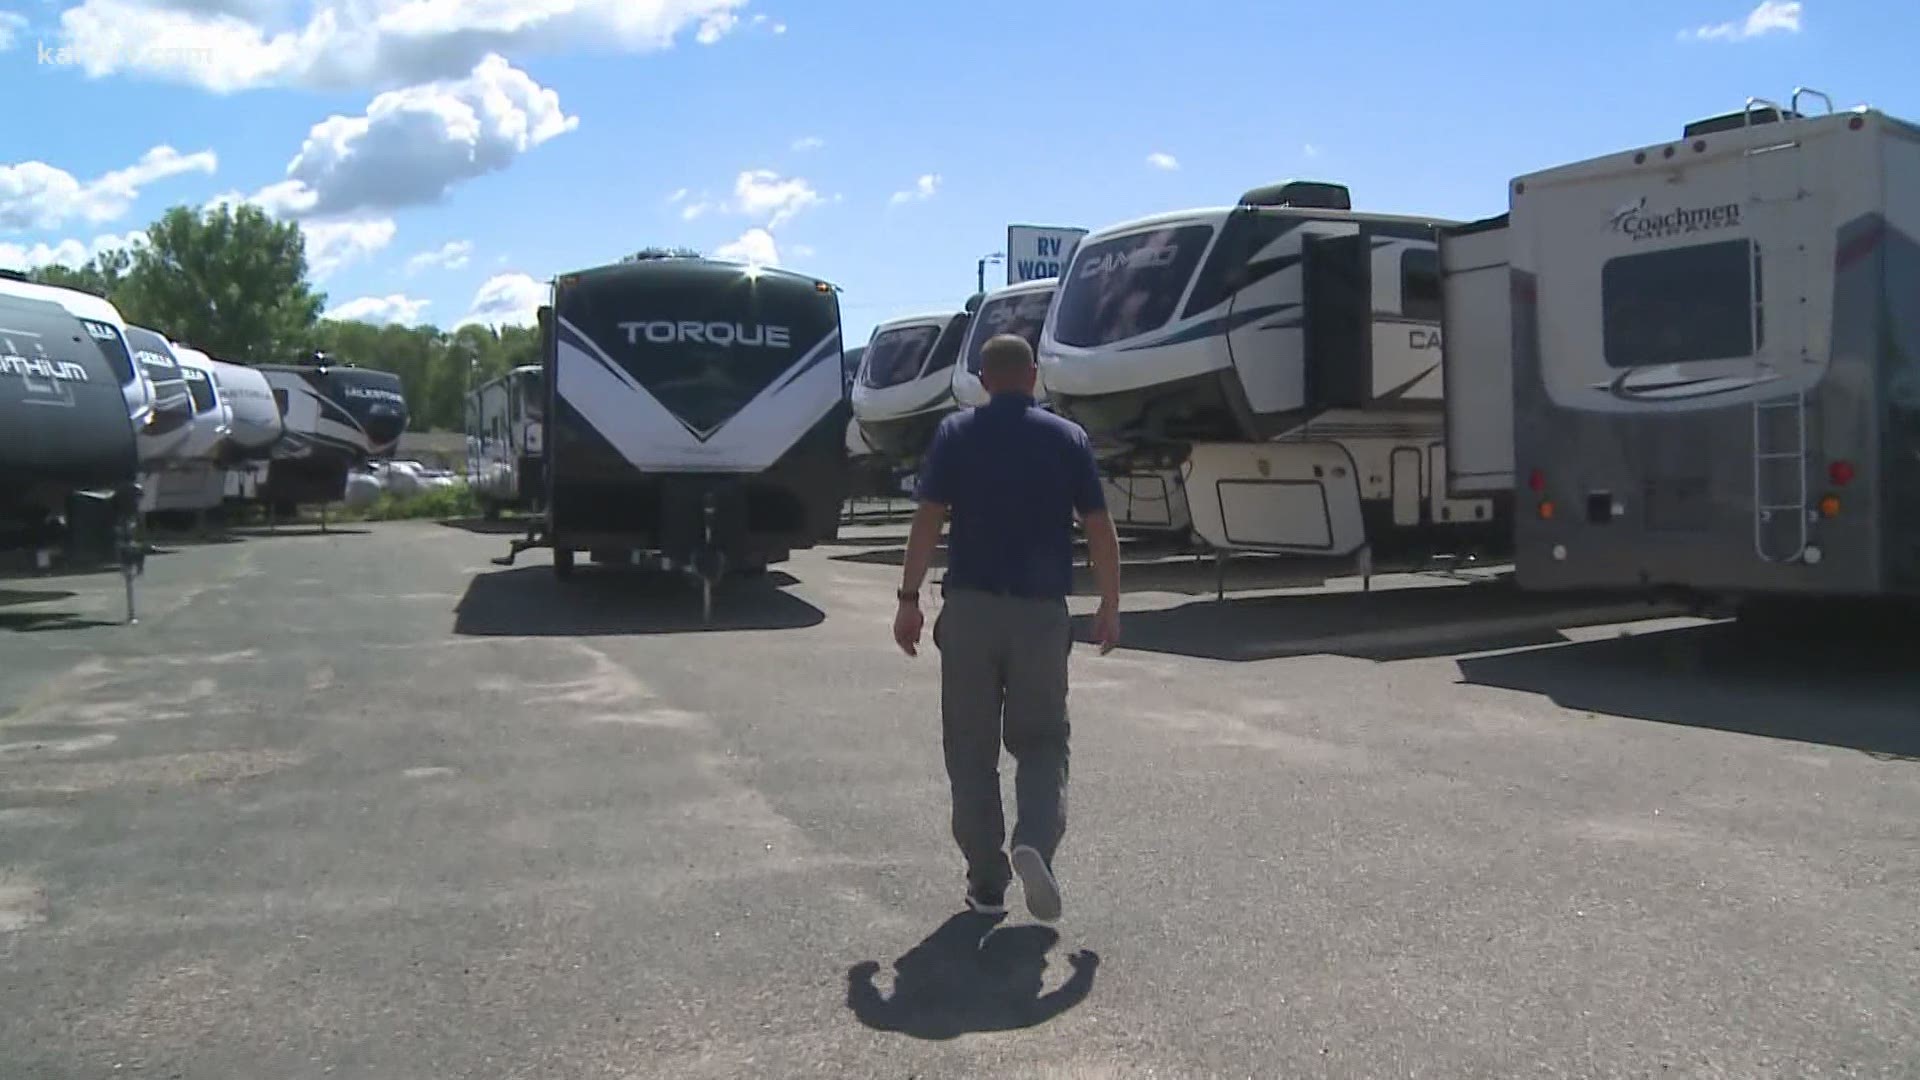 Even big ticket items like boats and RVs are selling fast. Some makes and models aren't available for one to four months, others are backlogged until February.